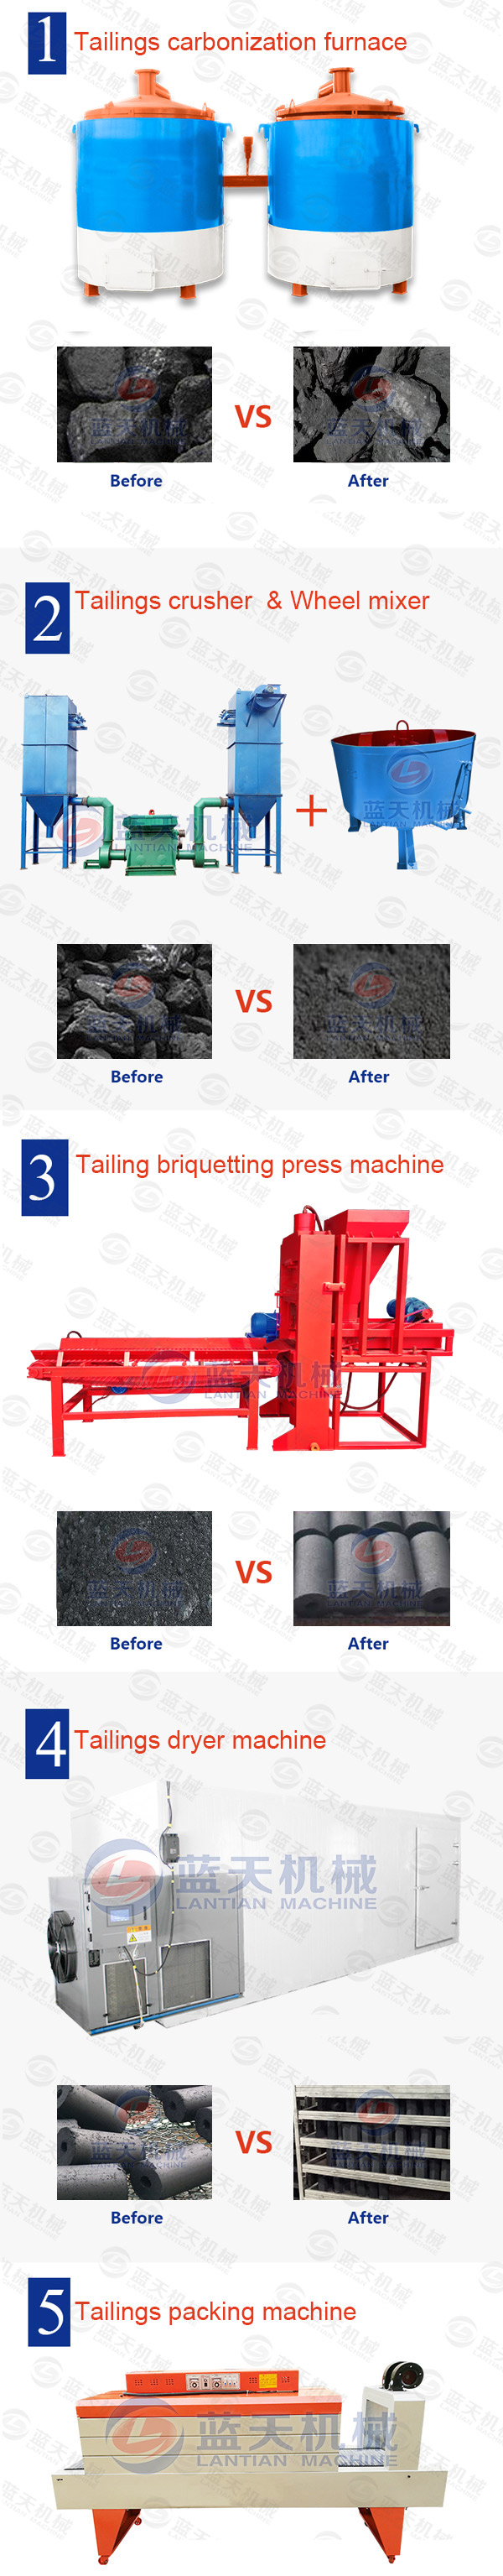 Product line of tailings briquetting press machine